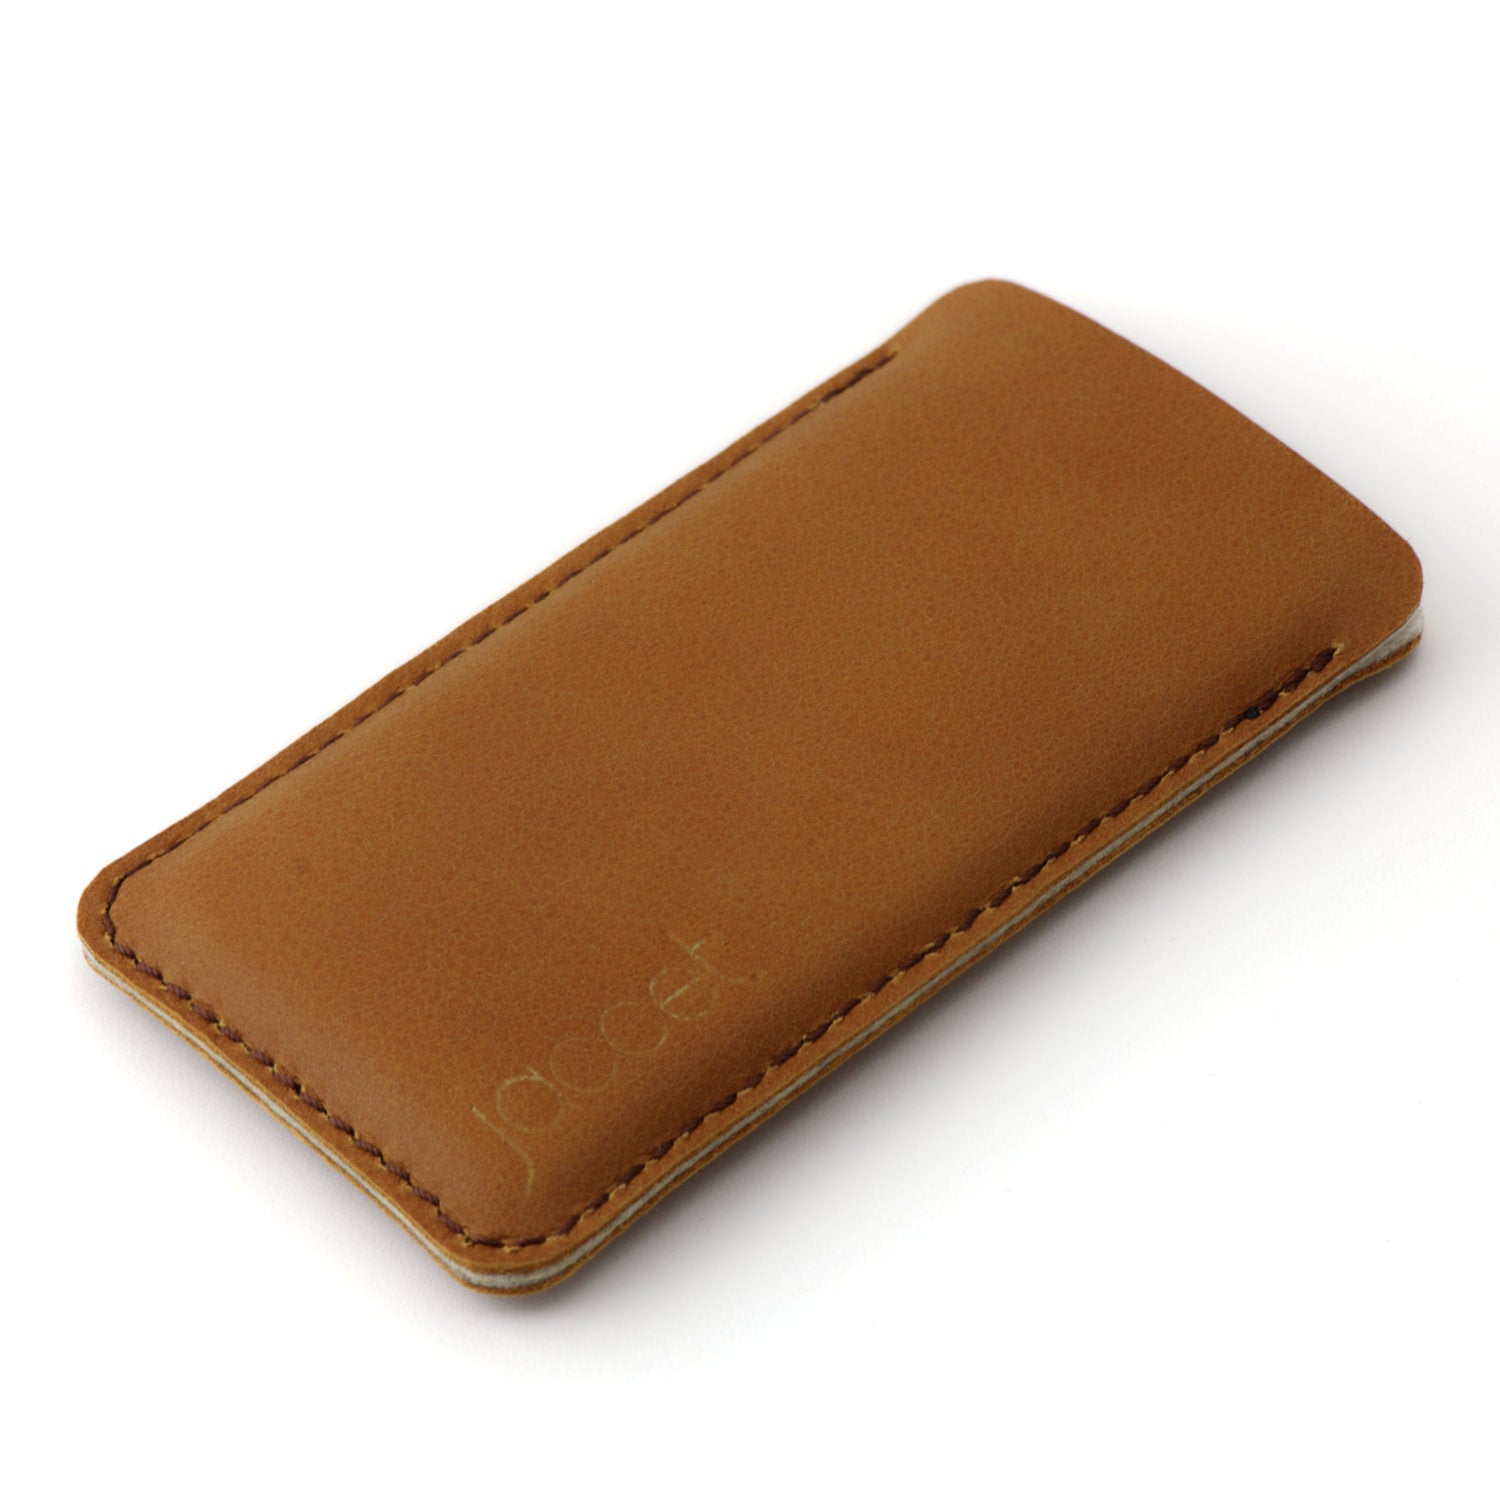 JACCET leather Google Pixel sleeve - Cognac color leather with brown wool felt - 100% Handmade